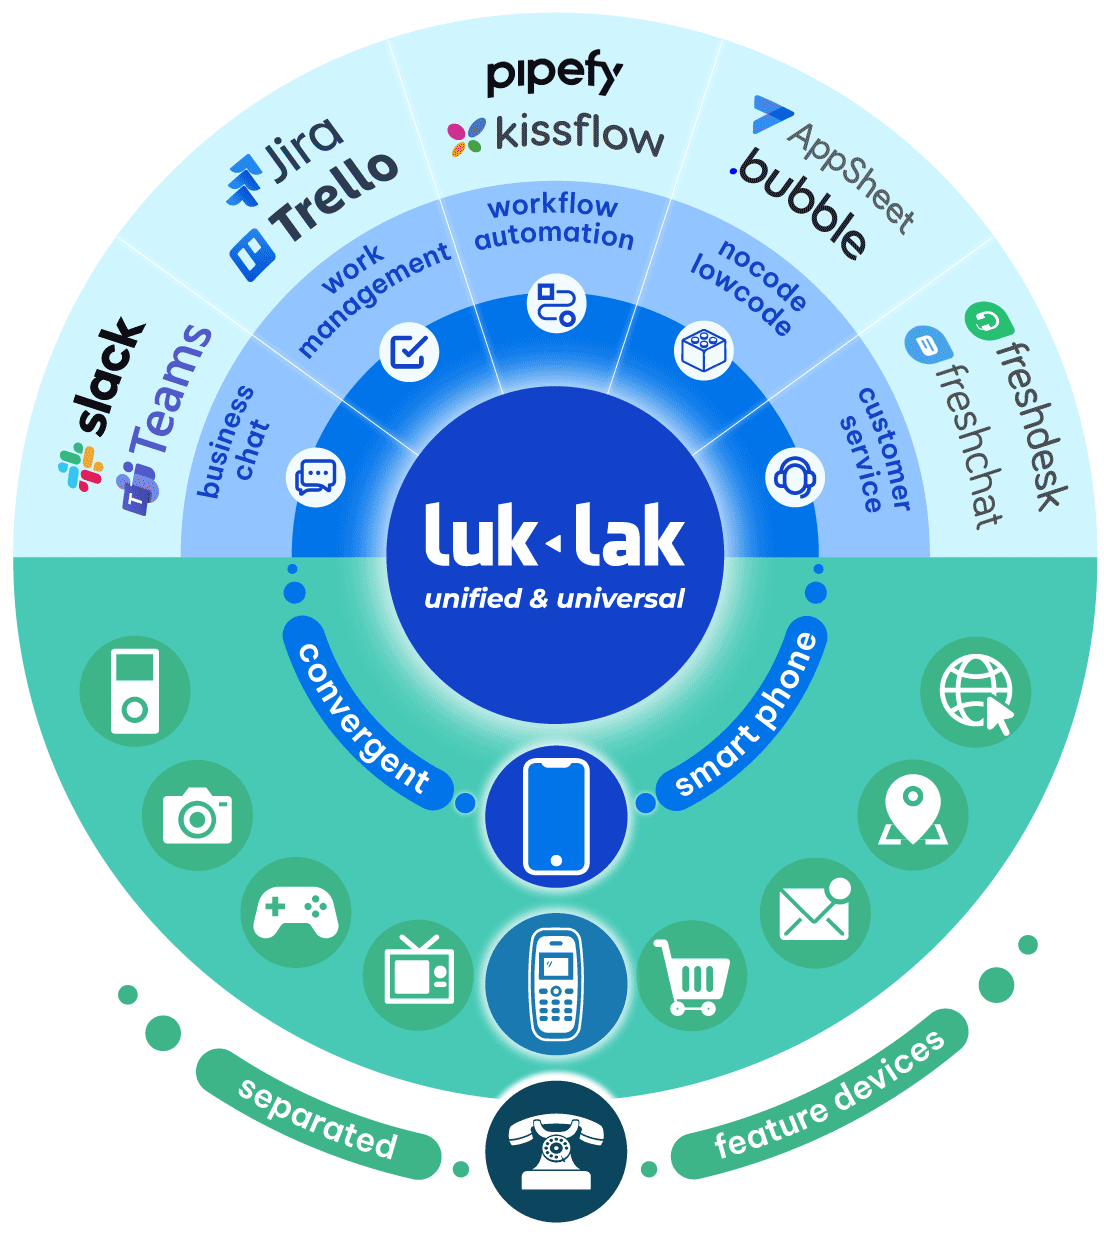 luklak thay thế 5 dòng sản phẩm: business chat, work management, workflow automation, nocode & lowcode, customer service